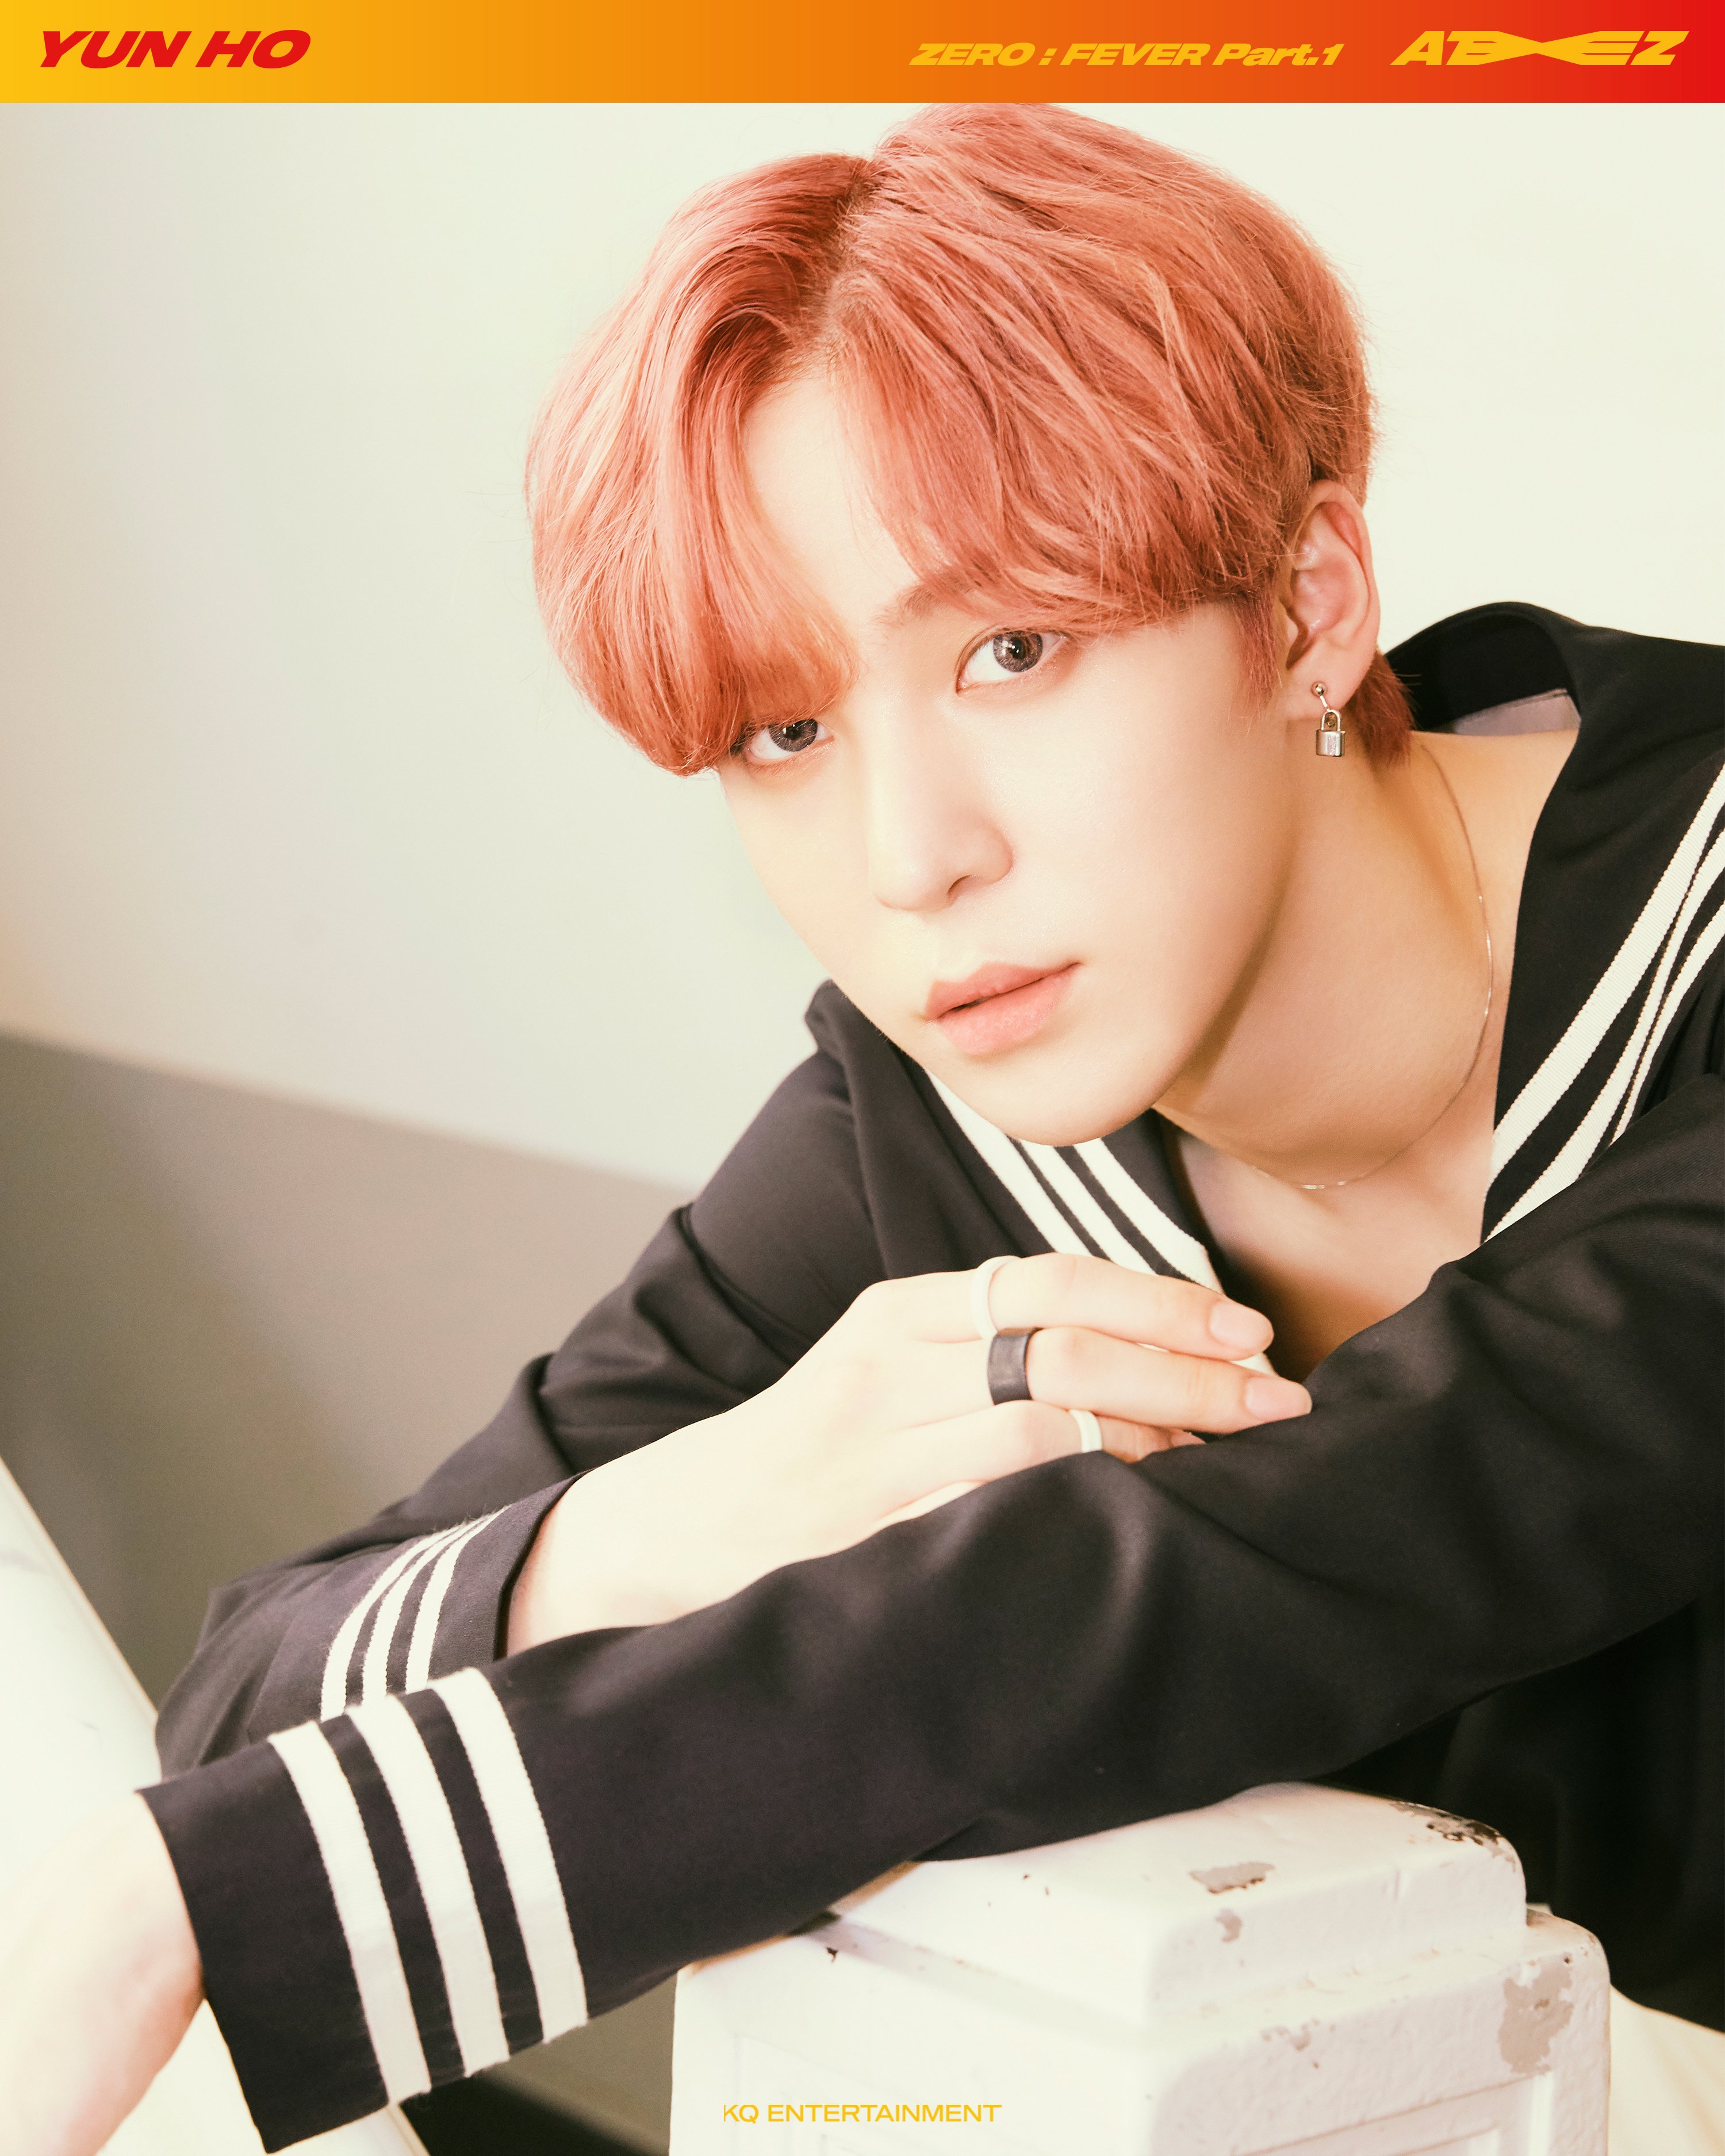 Yunho (ATEEZ) Profile and Facts (Updated!)